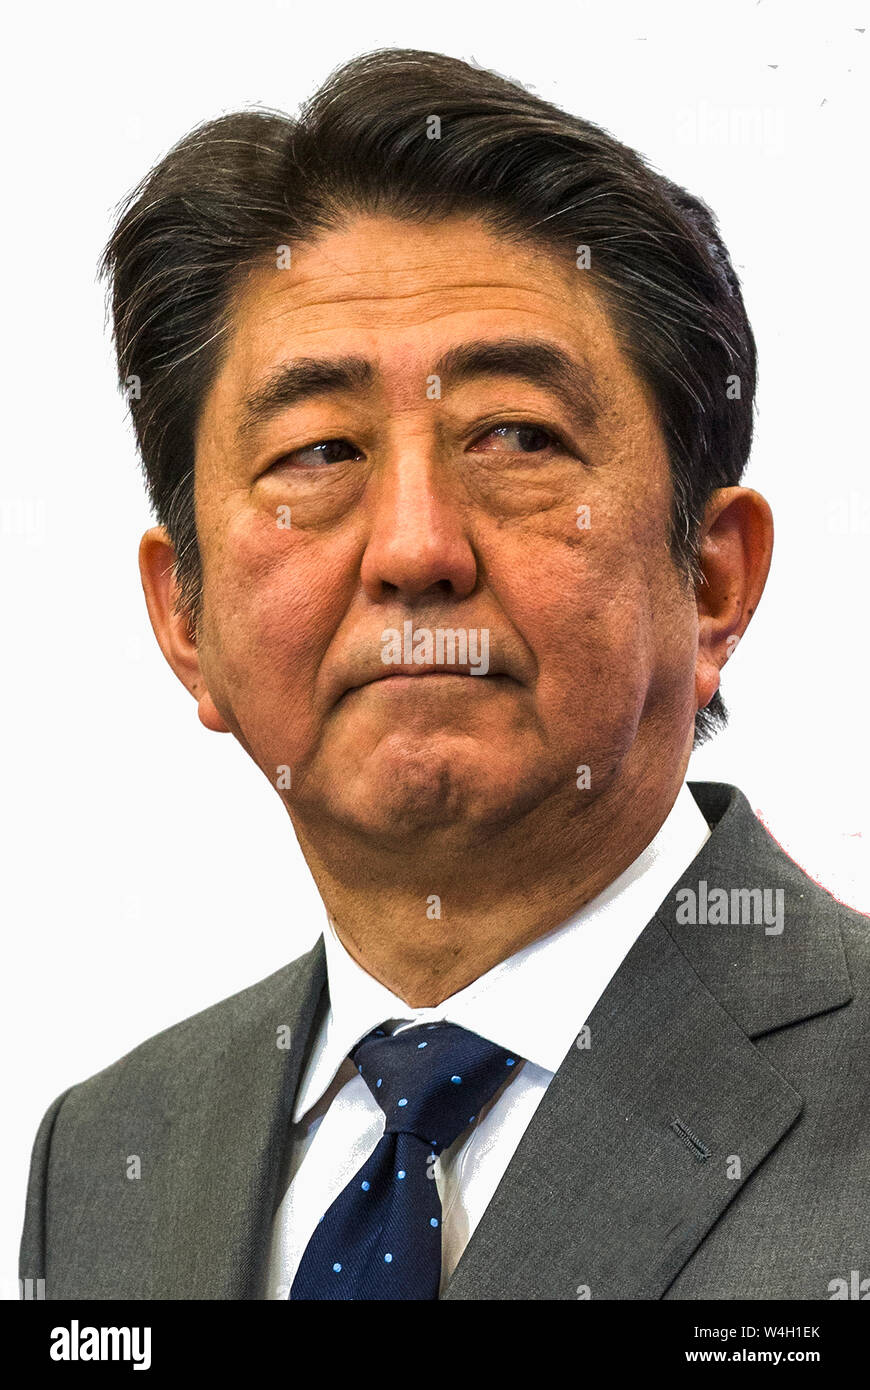 Shinzo Abe - * 21.09.1954 - Japanese politician, Prime Minister of Japan and Leader of the Liberal Democratic Party of Japan LDP - Japan. Stock Photo